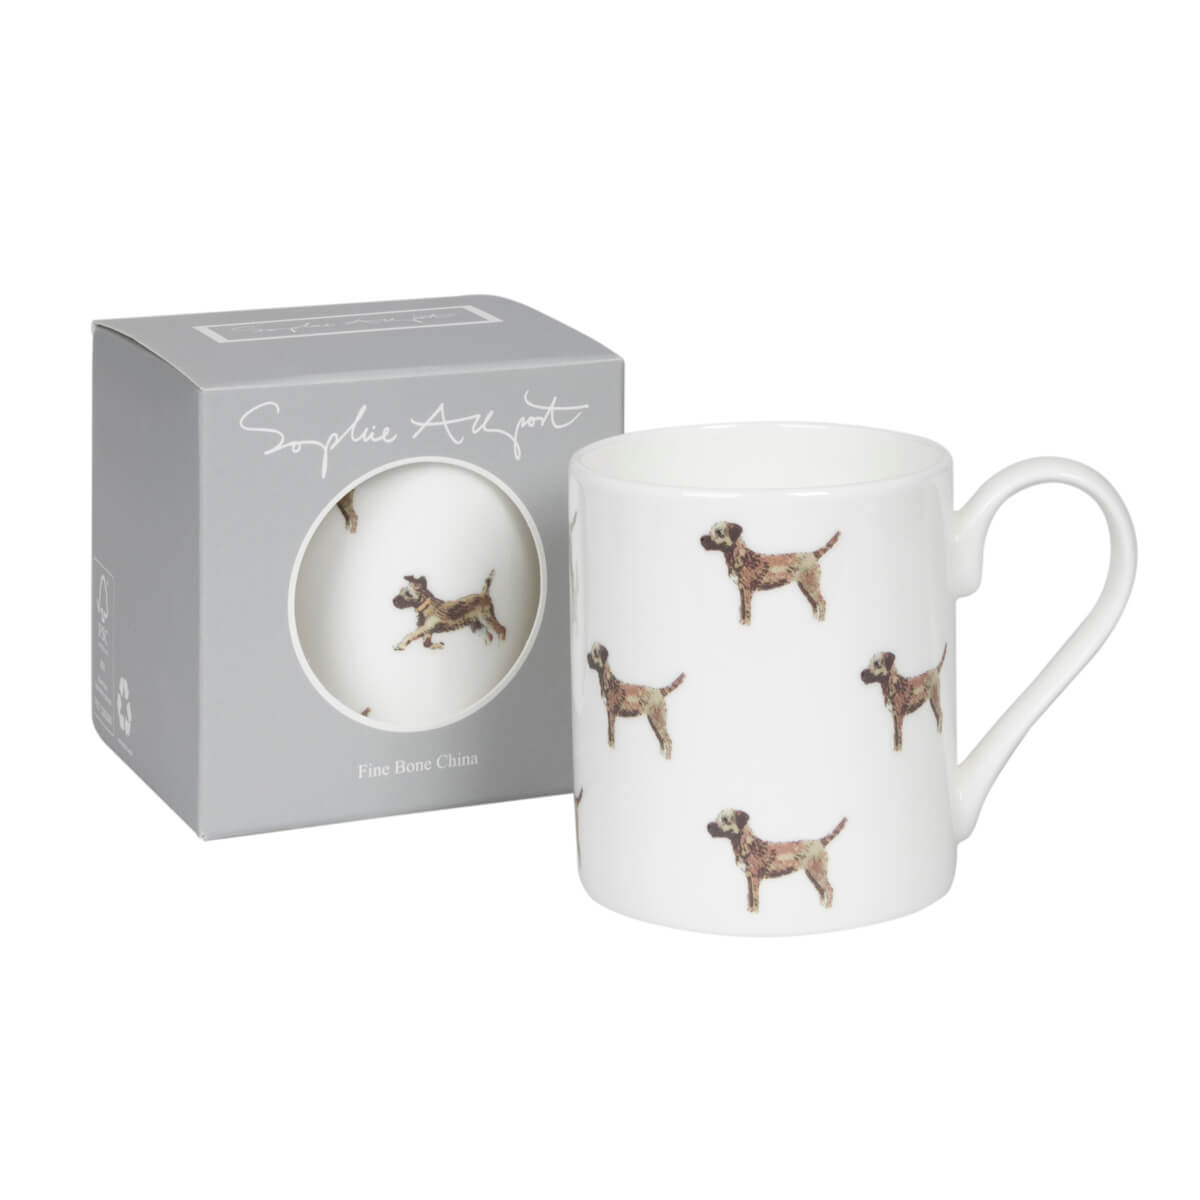 White fine bone china mug with border terriers with gift box by Sophie Allport